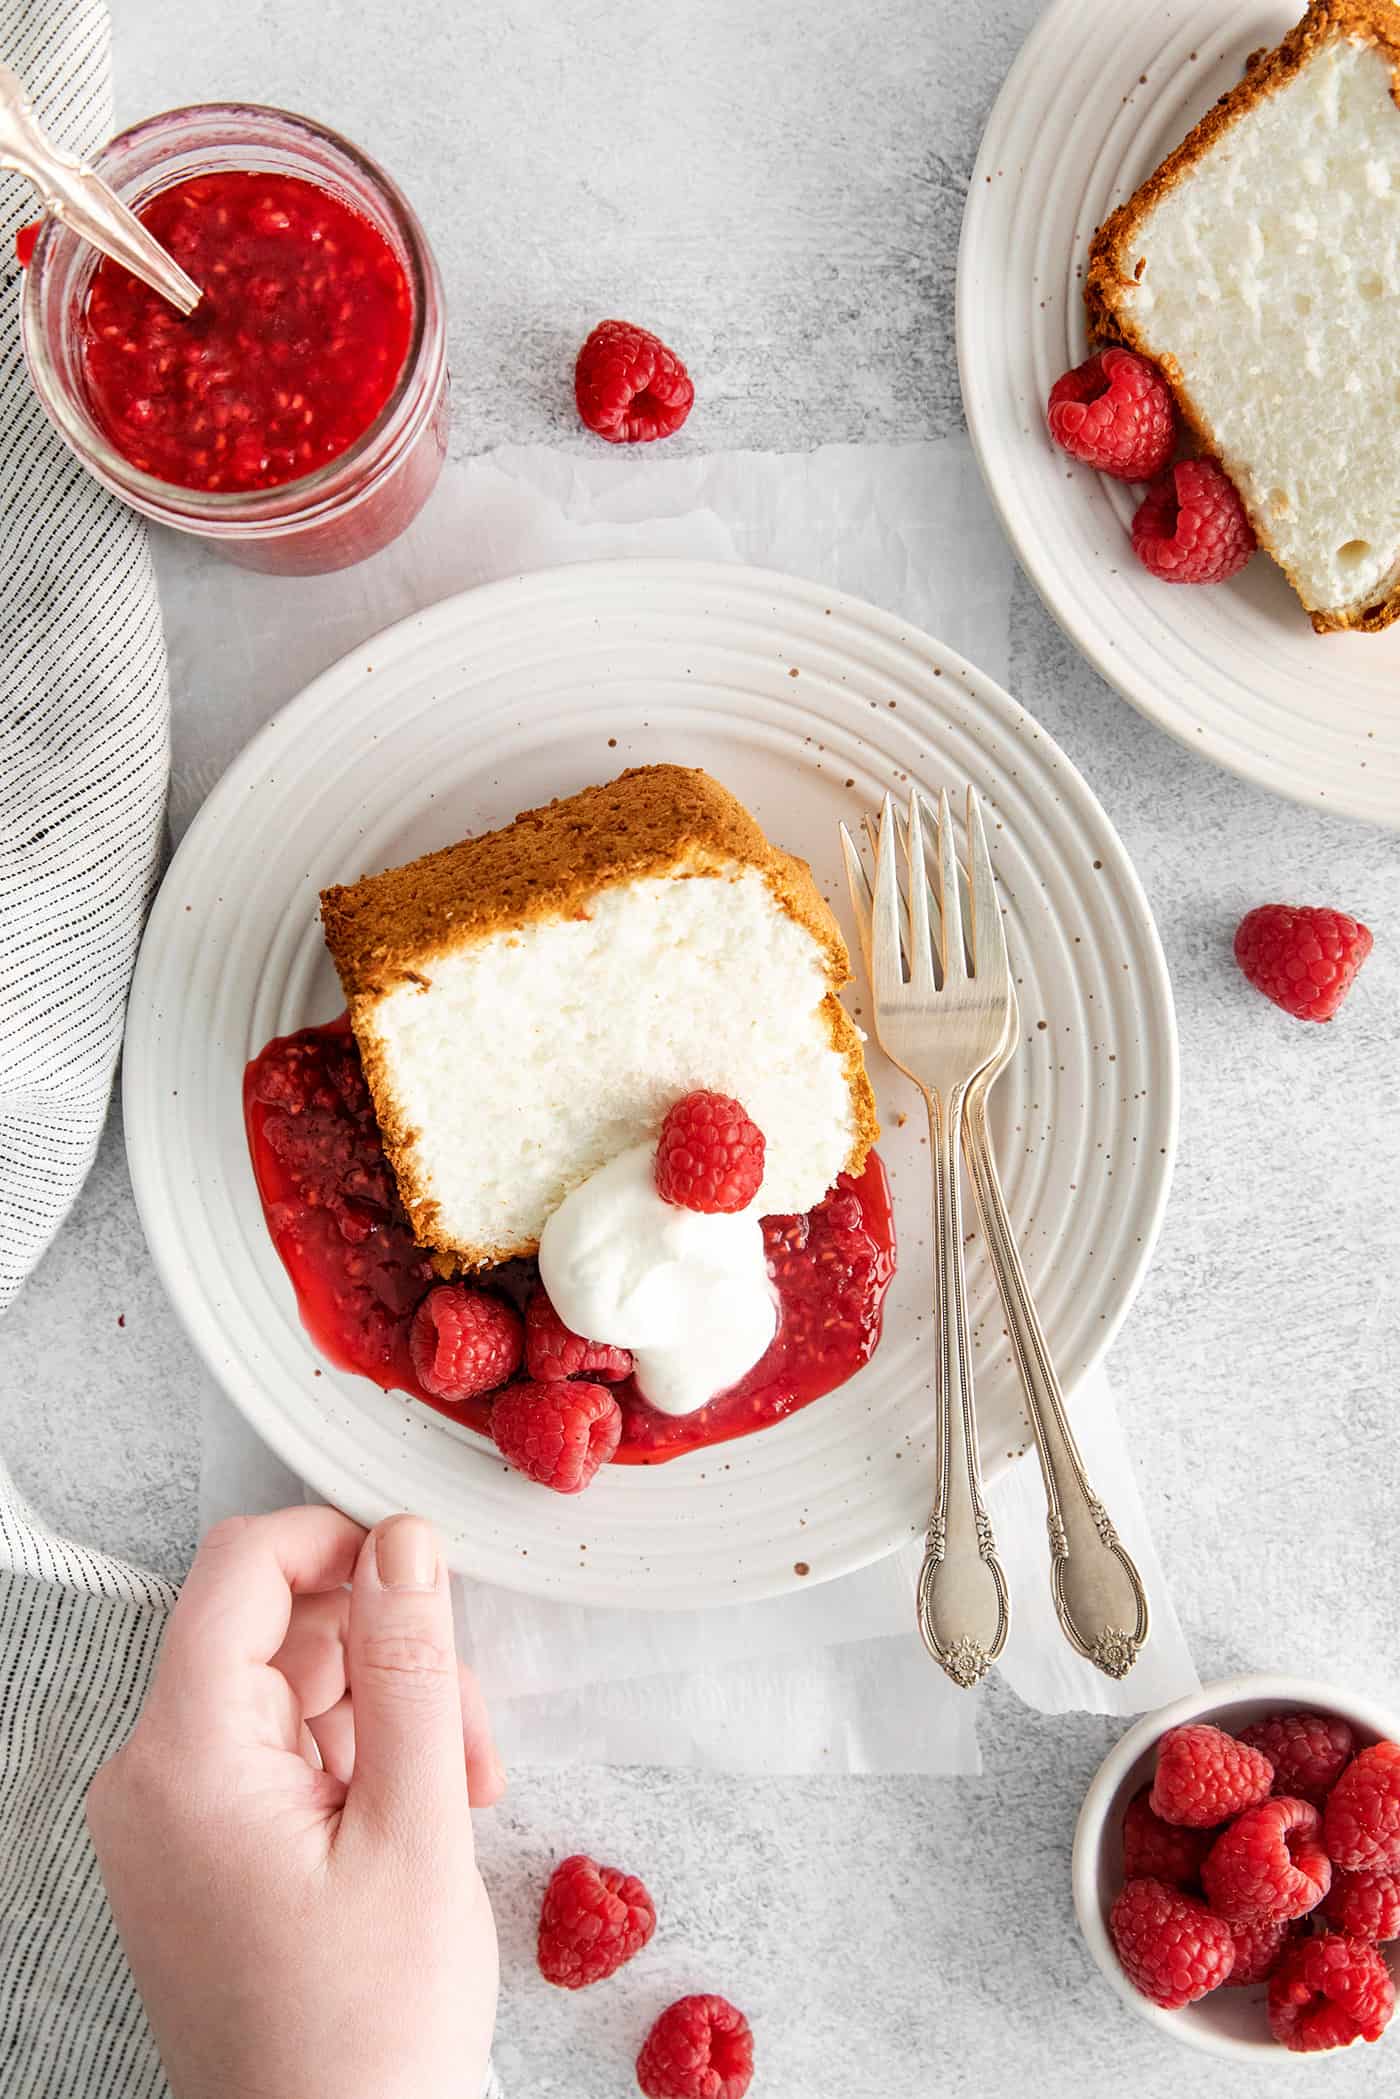 A hand grabbing a slice of angel food cake with whipped cream and raspberry sauce